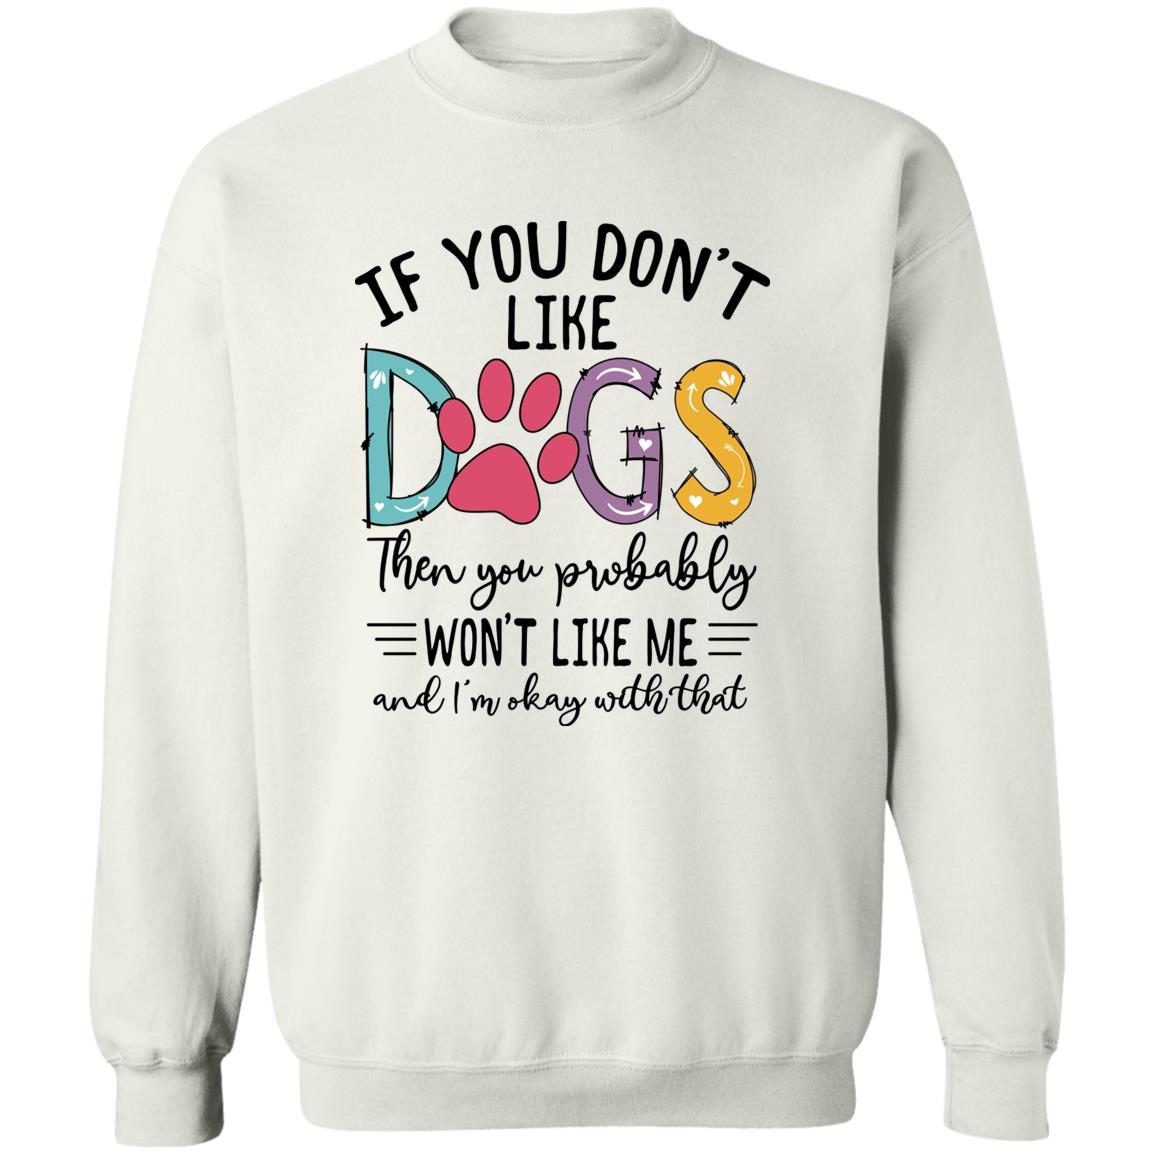 If You Don’t Like Dogs Then You Probably Won’t Like Me shirt 4